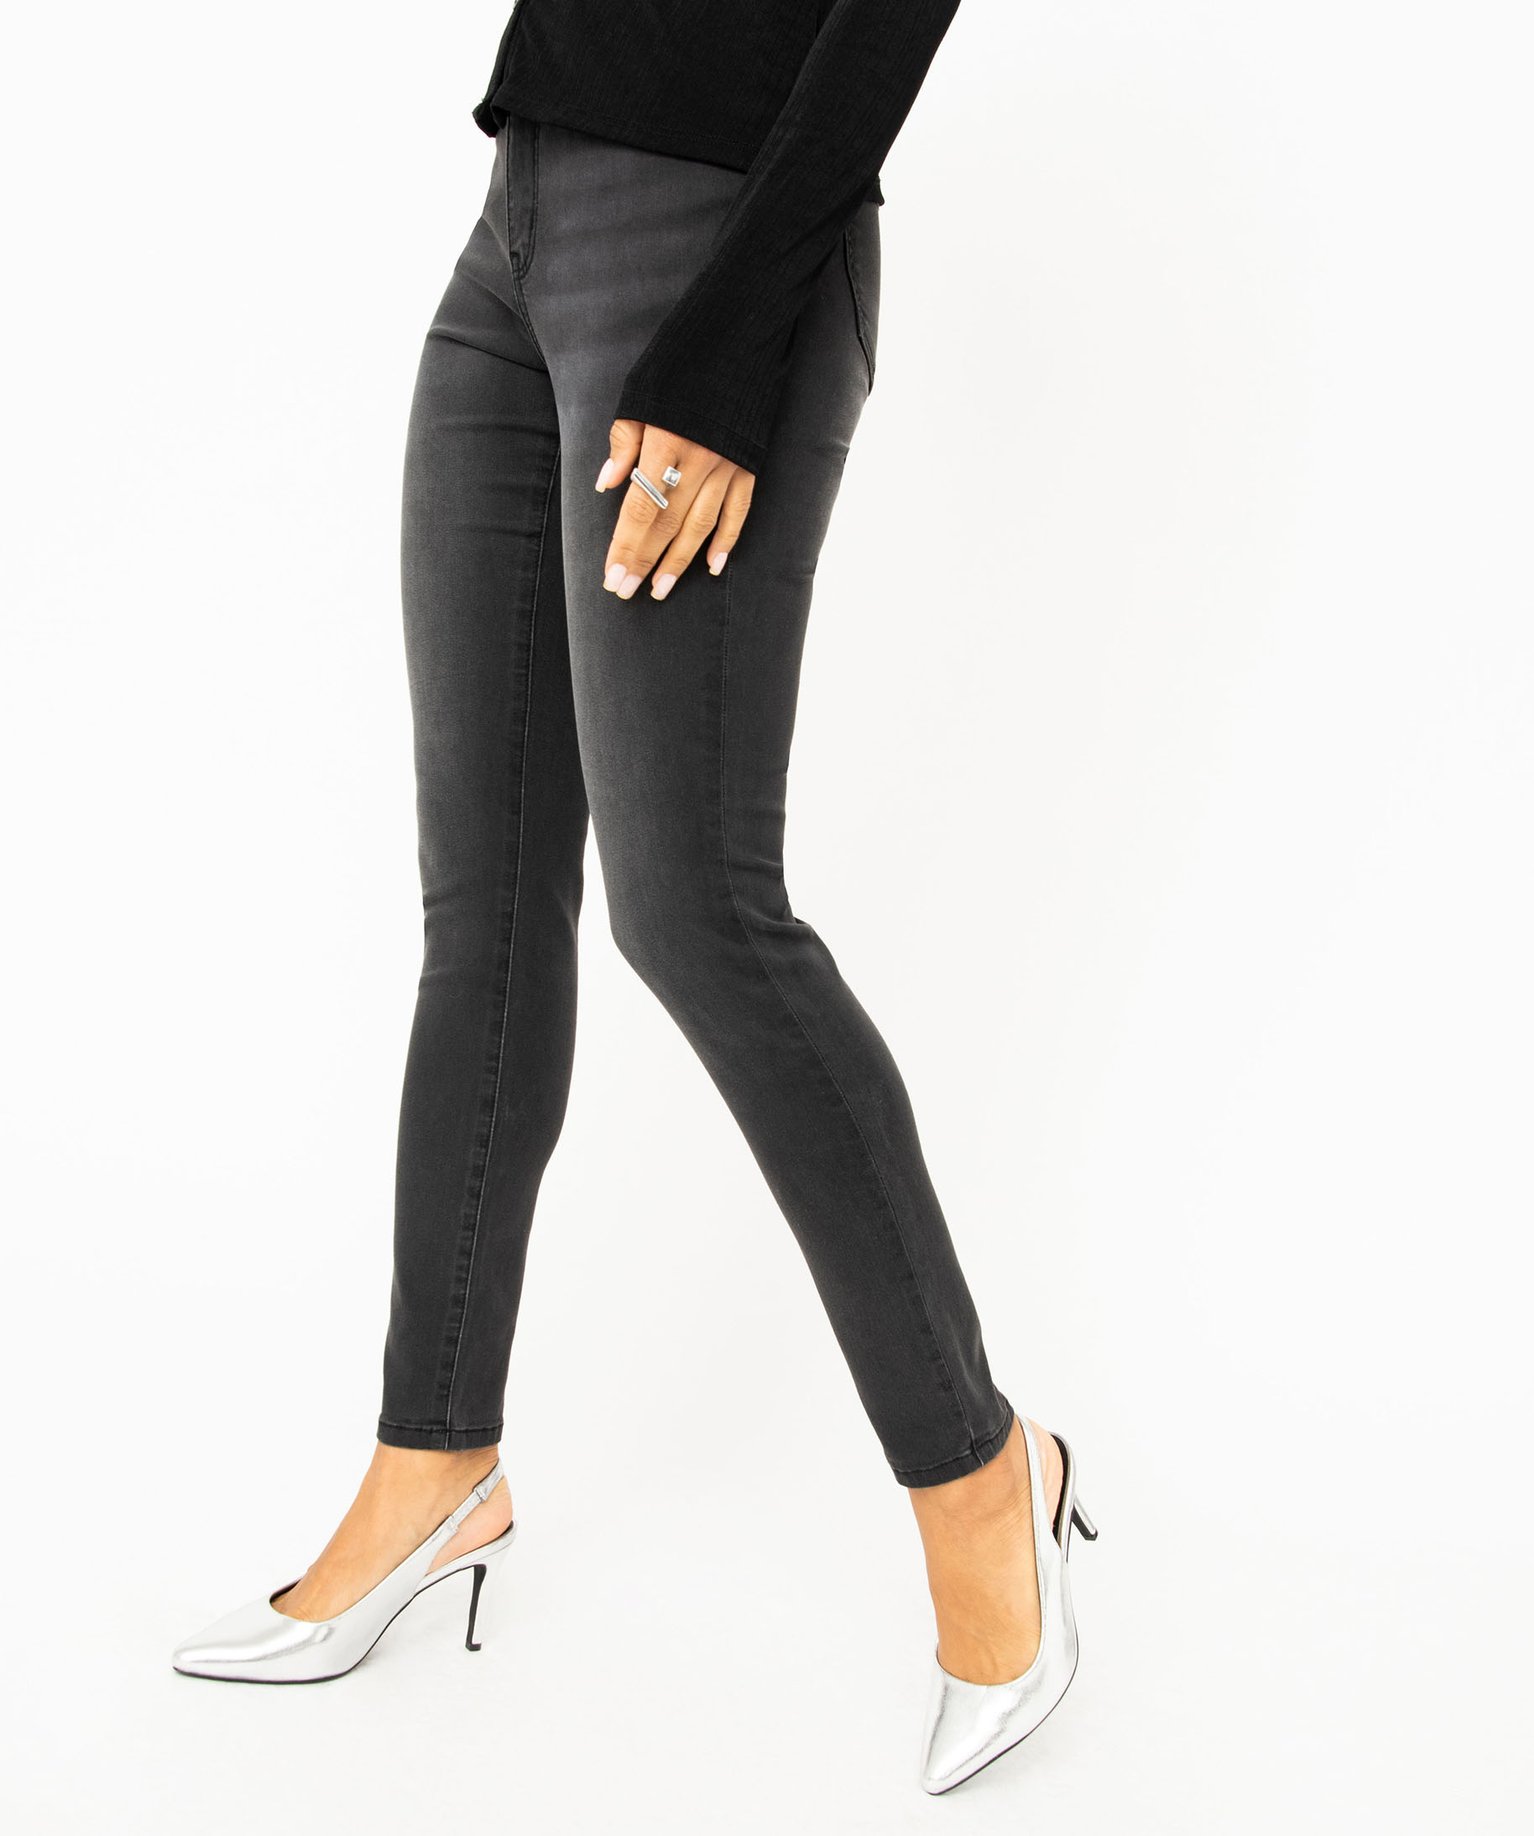 jean skinny taille haute stretch femme gris